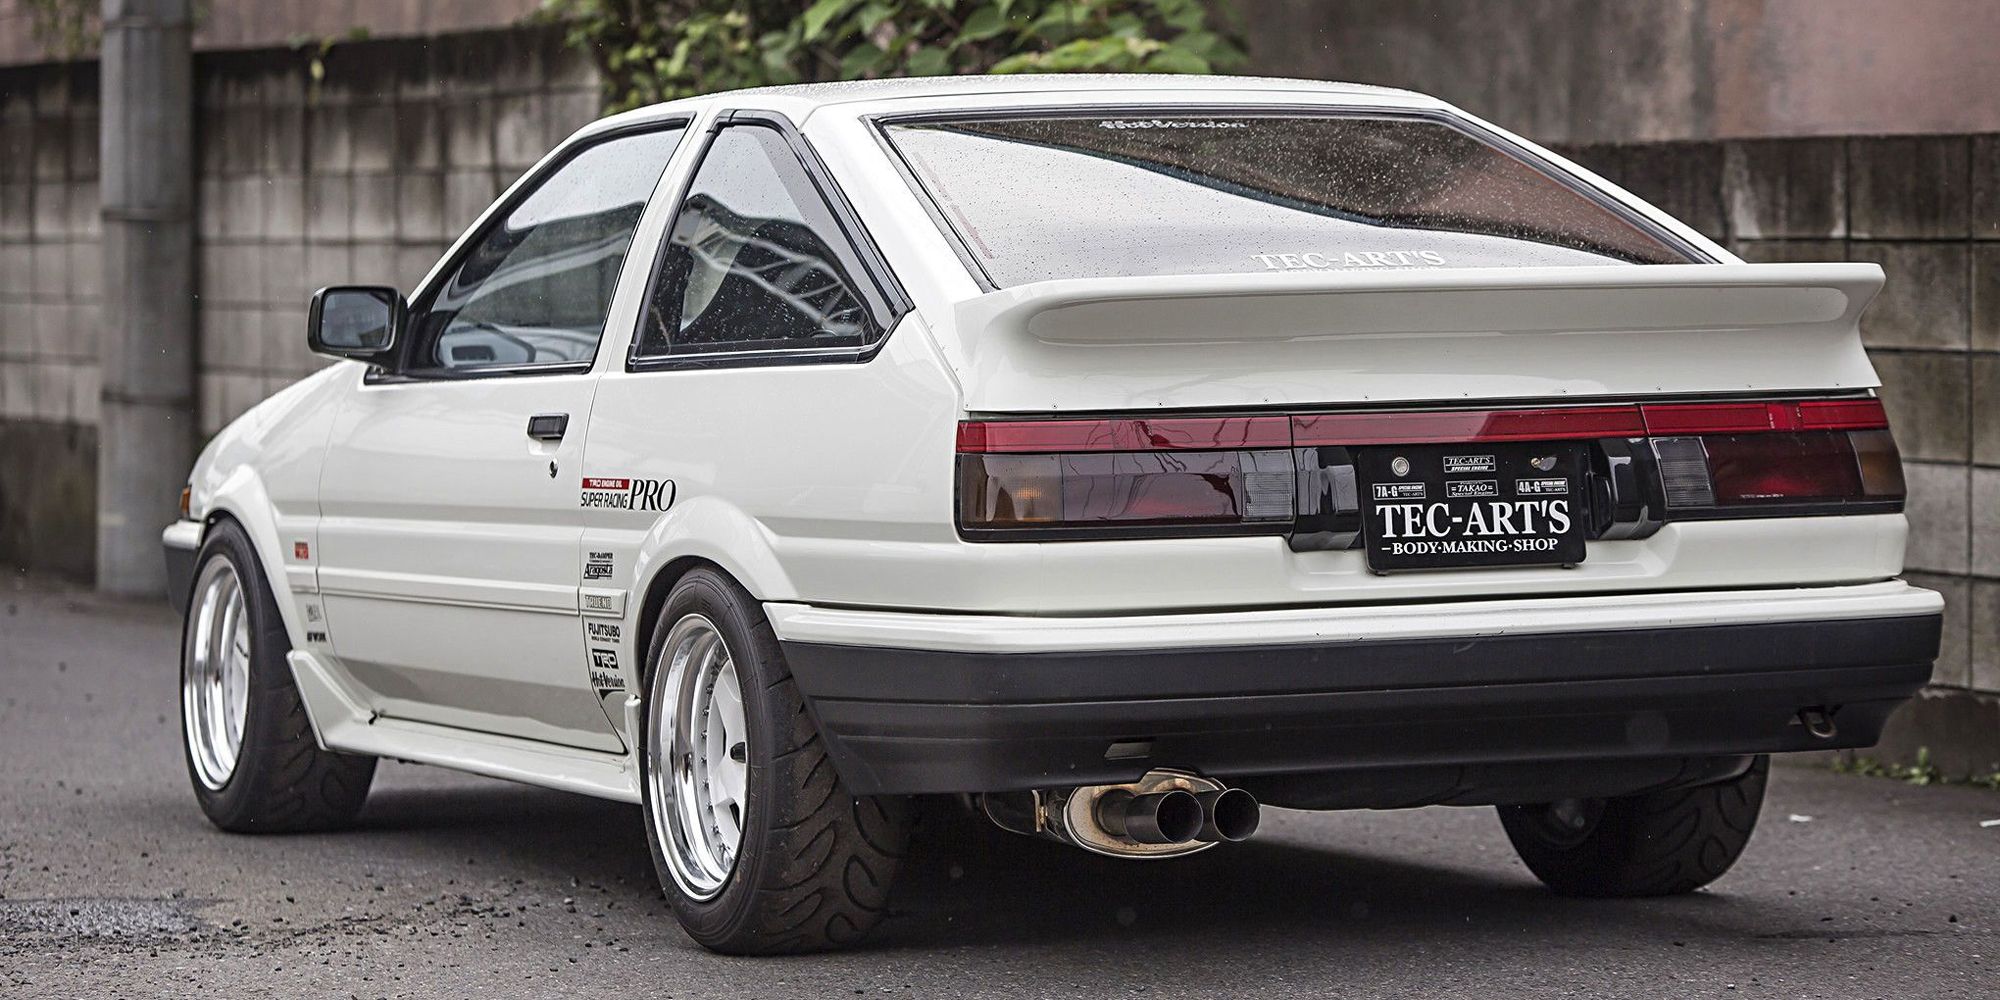 The rear of a modified AE86